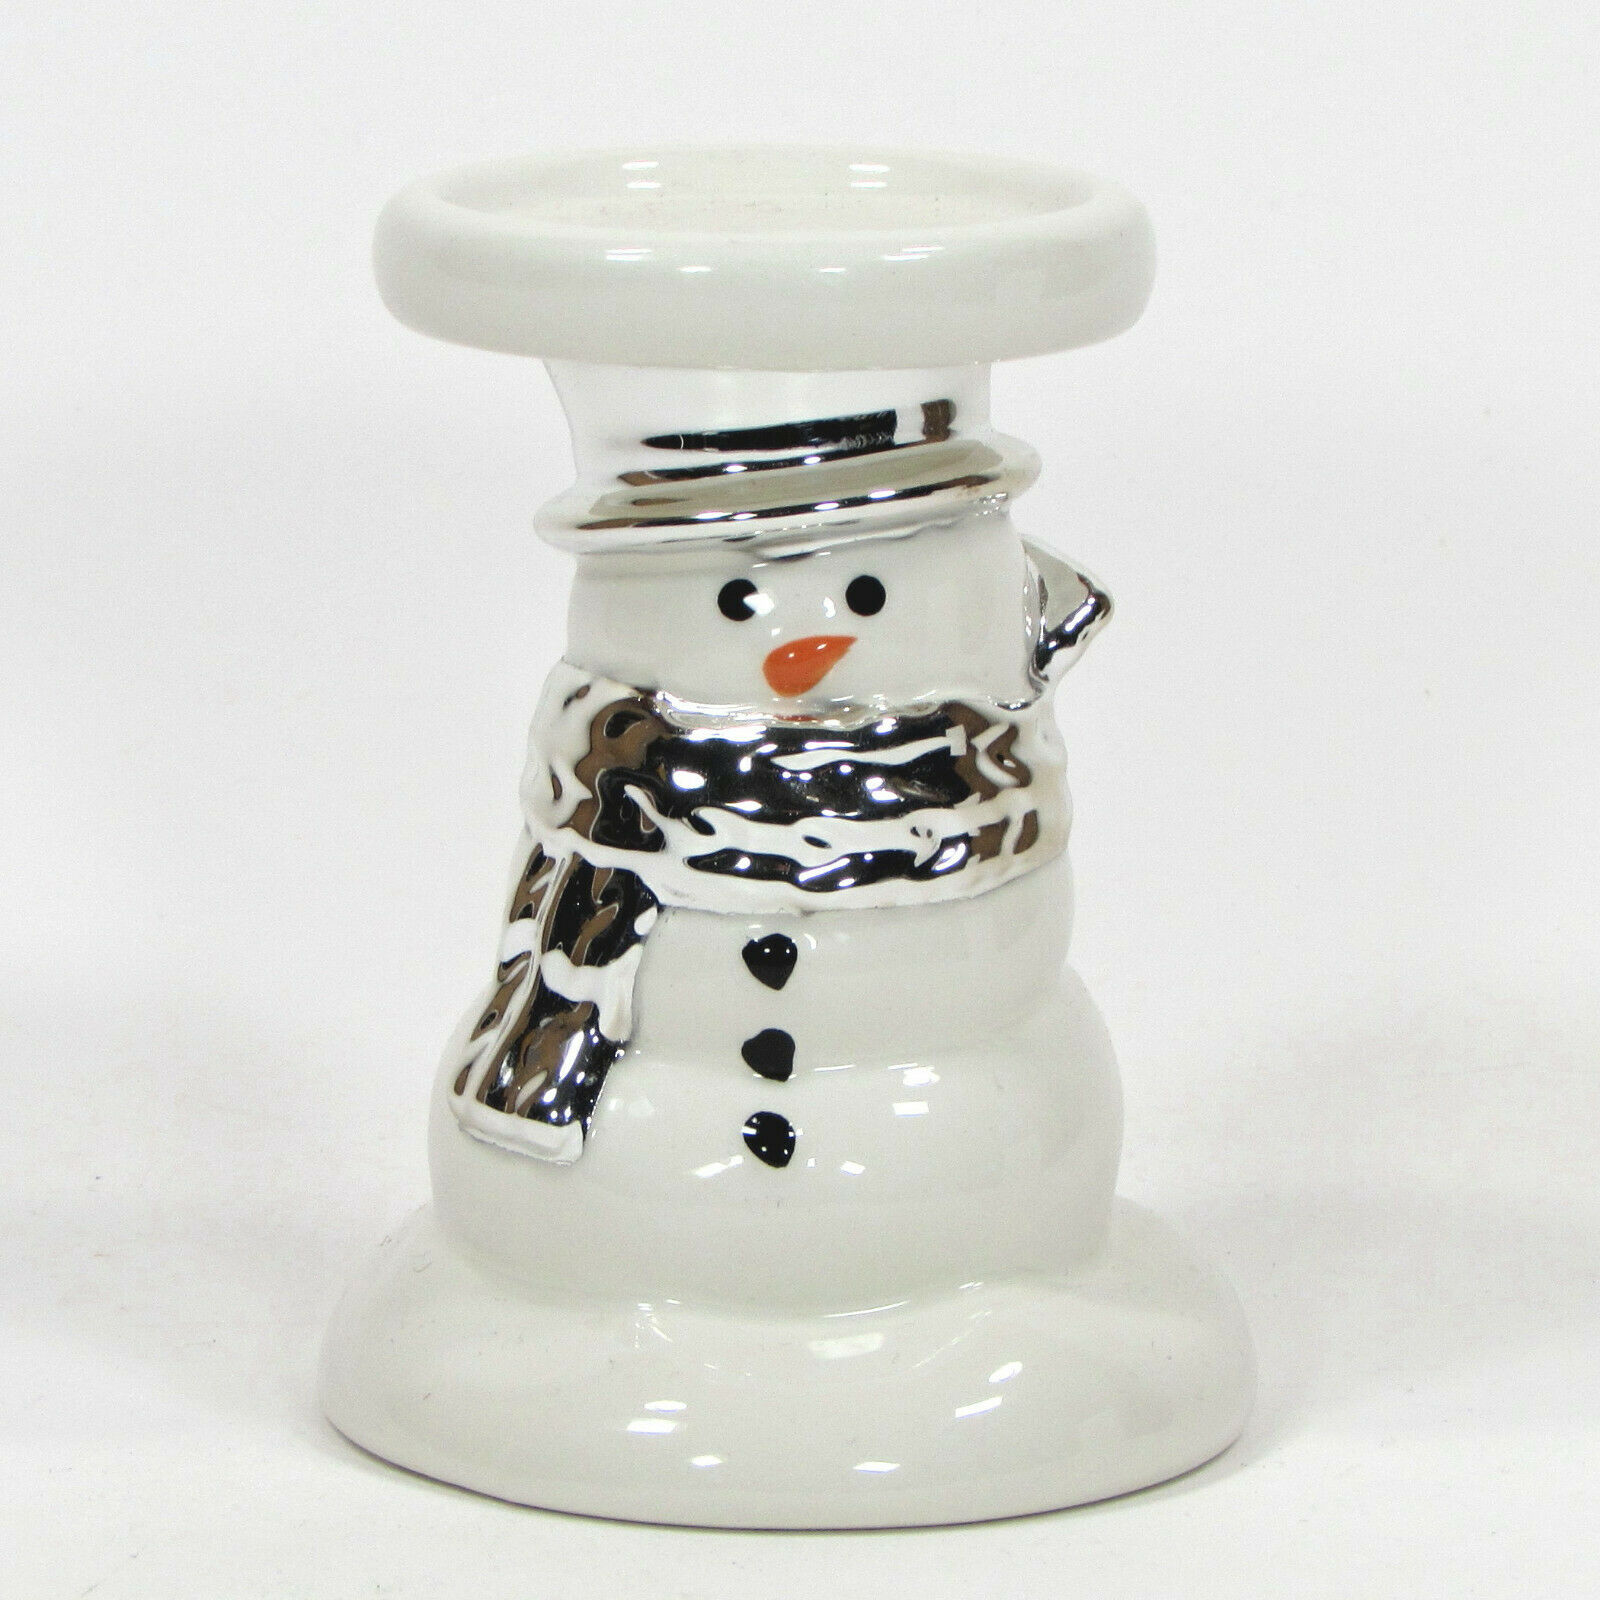 Bath & Body Works Snowday 4.5" Snowman Candle Holder White Silver Christmas